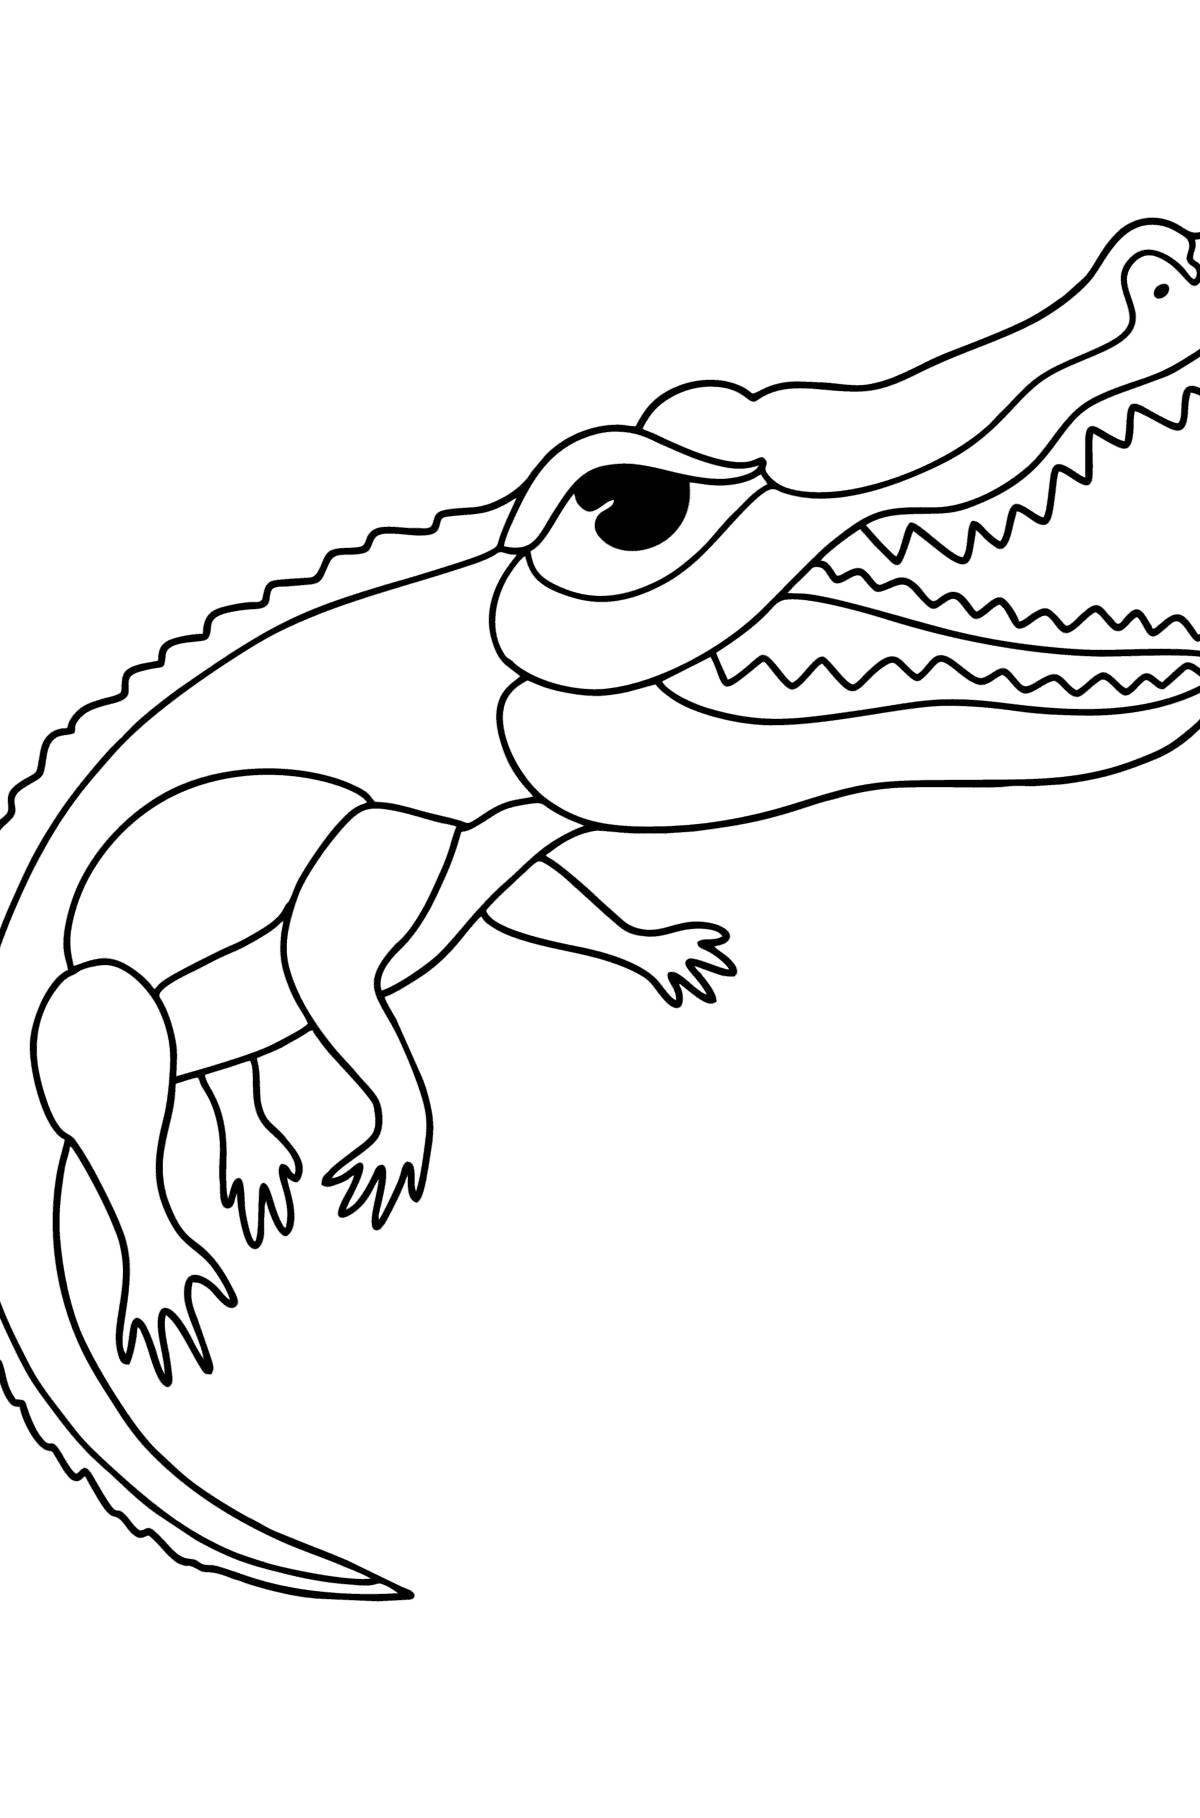 Fun coloring crocodile for children 3-4 years old